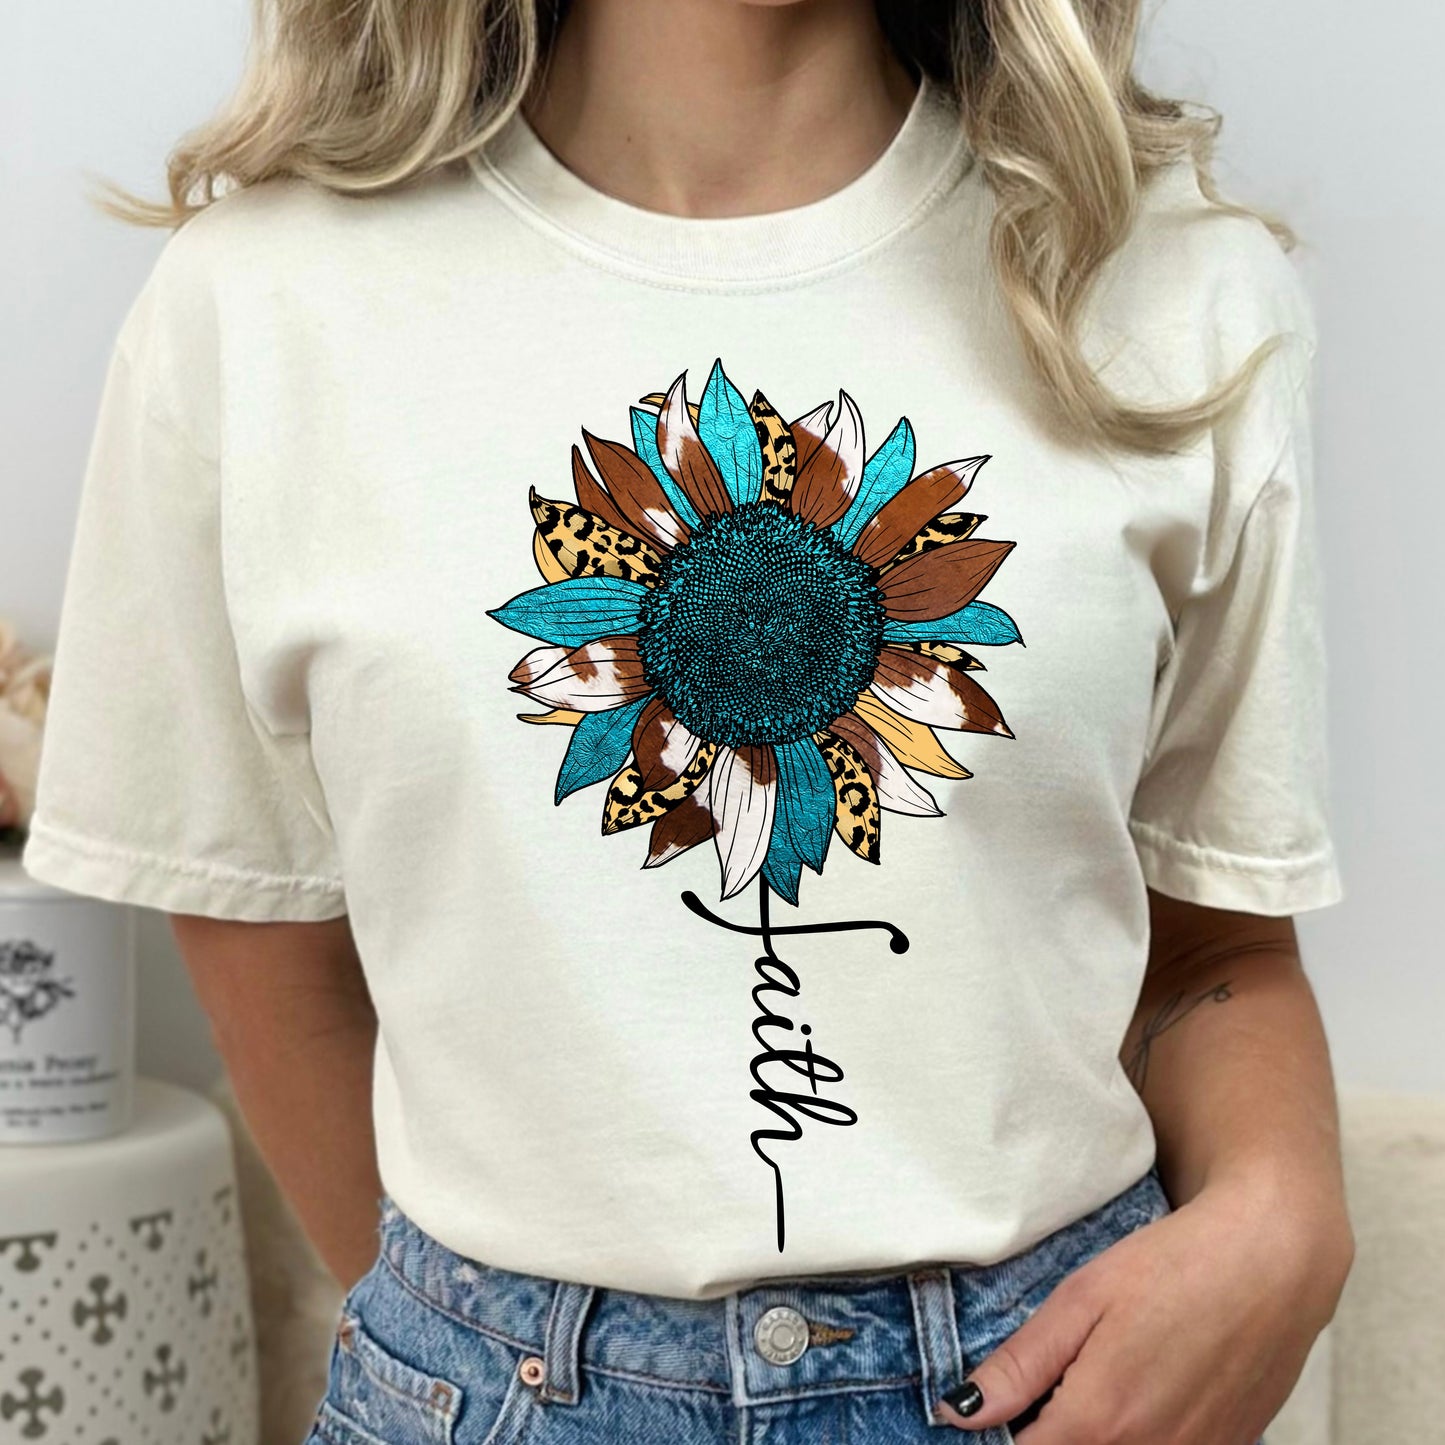 Colorful Sunflower with Faith Garment-Dyed T-shirt, Inspirational Tshirt, Inspiring T-shirt, Sunflower Tshirt, Gifts For Her, Mom Gift